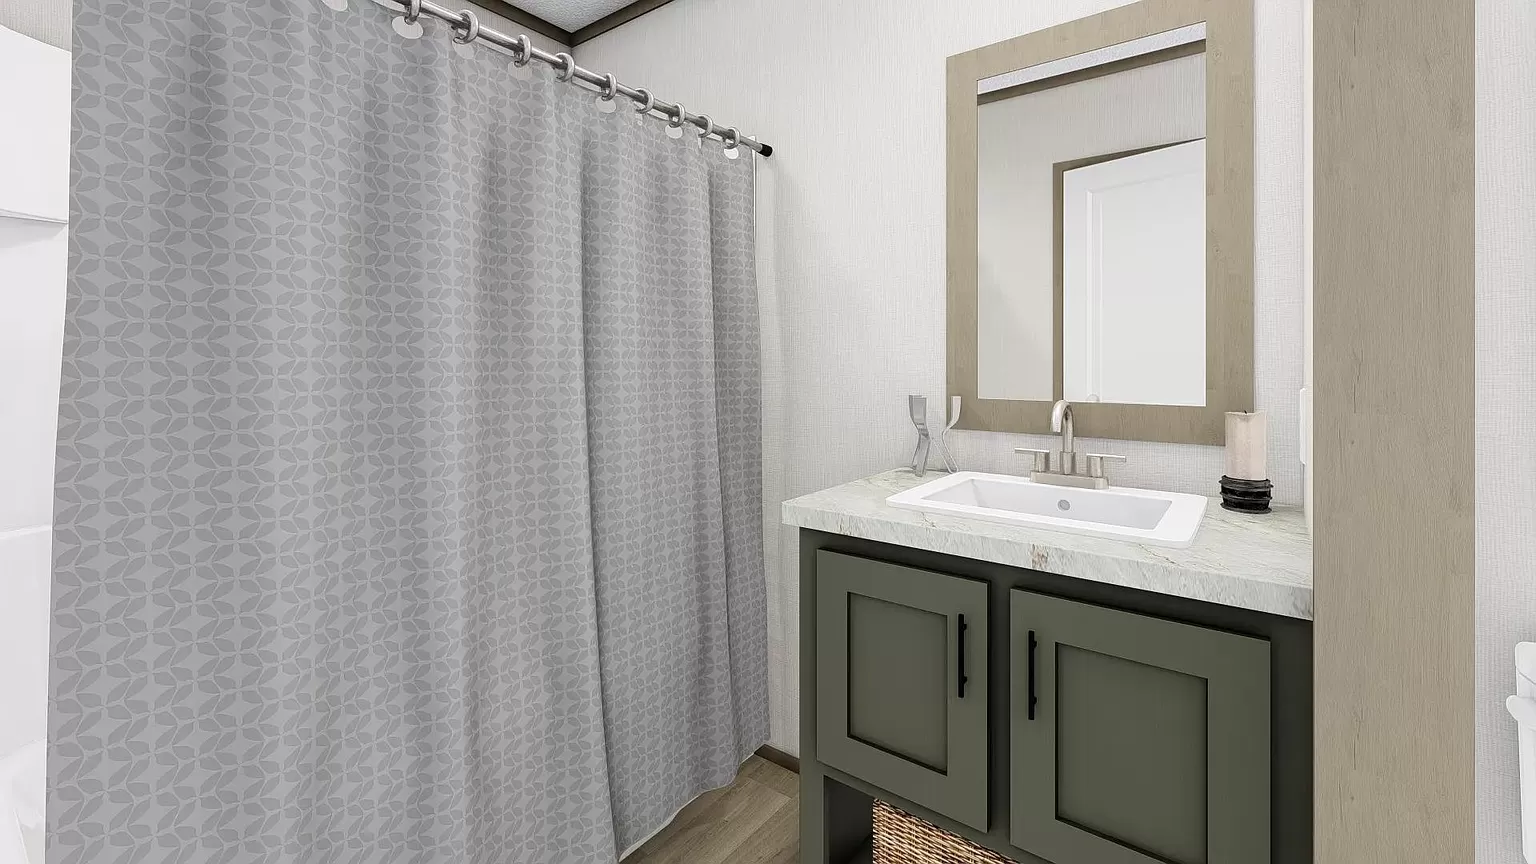 A modern bathroom with a shower curtain and vanity.